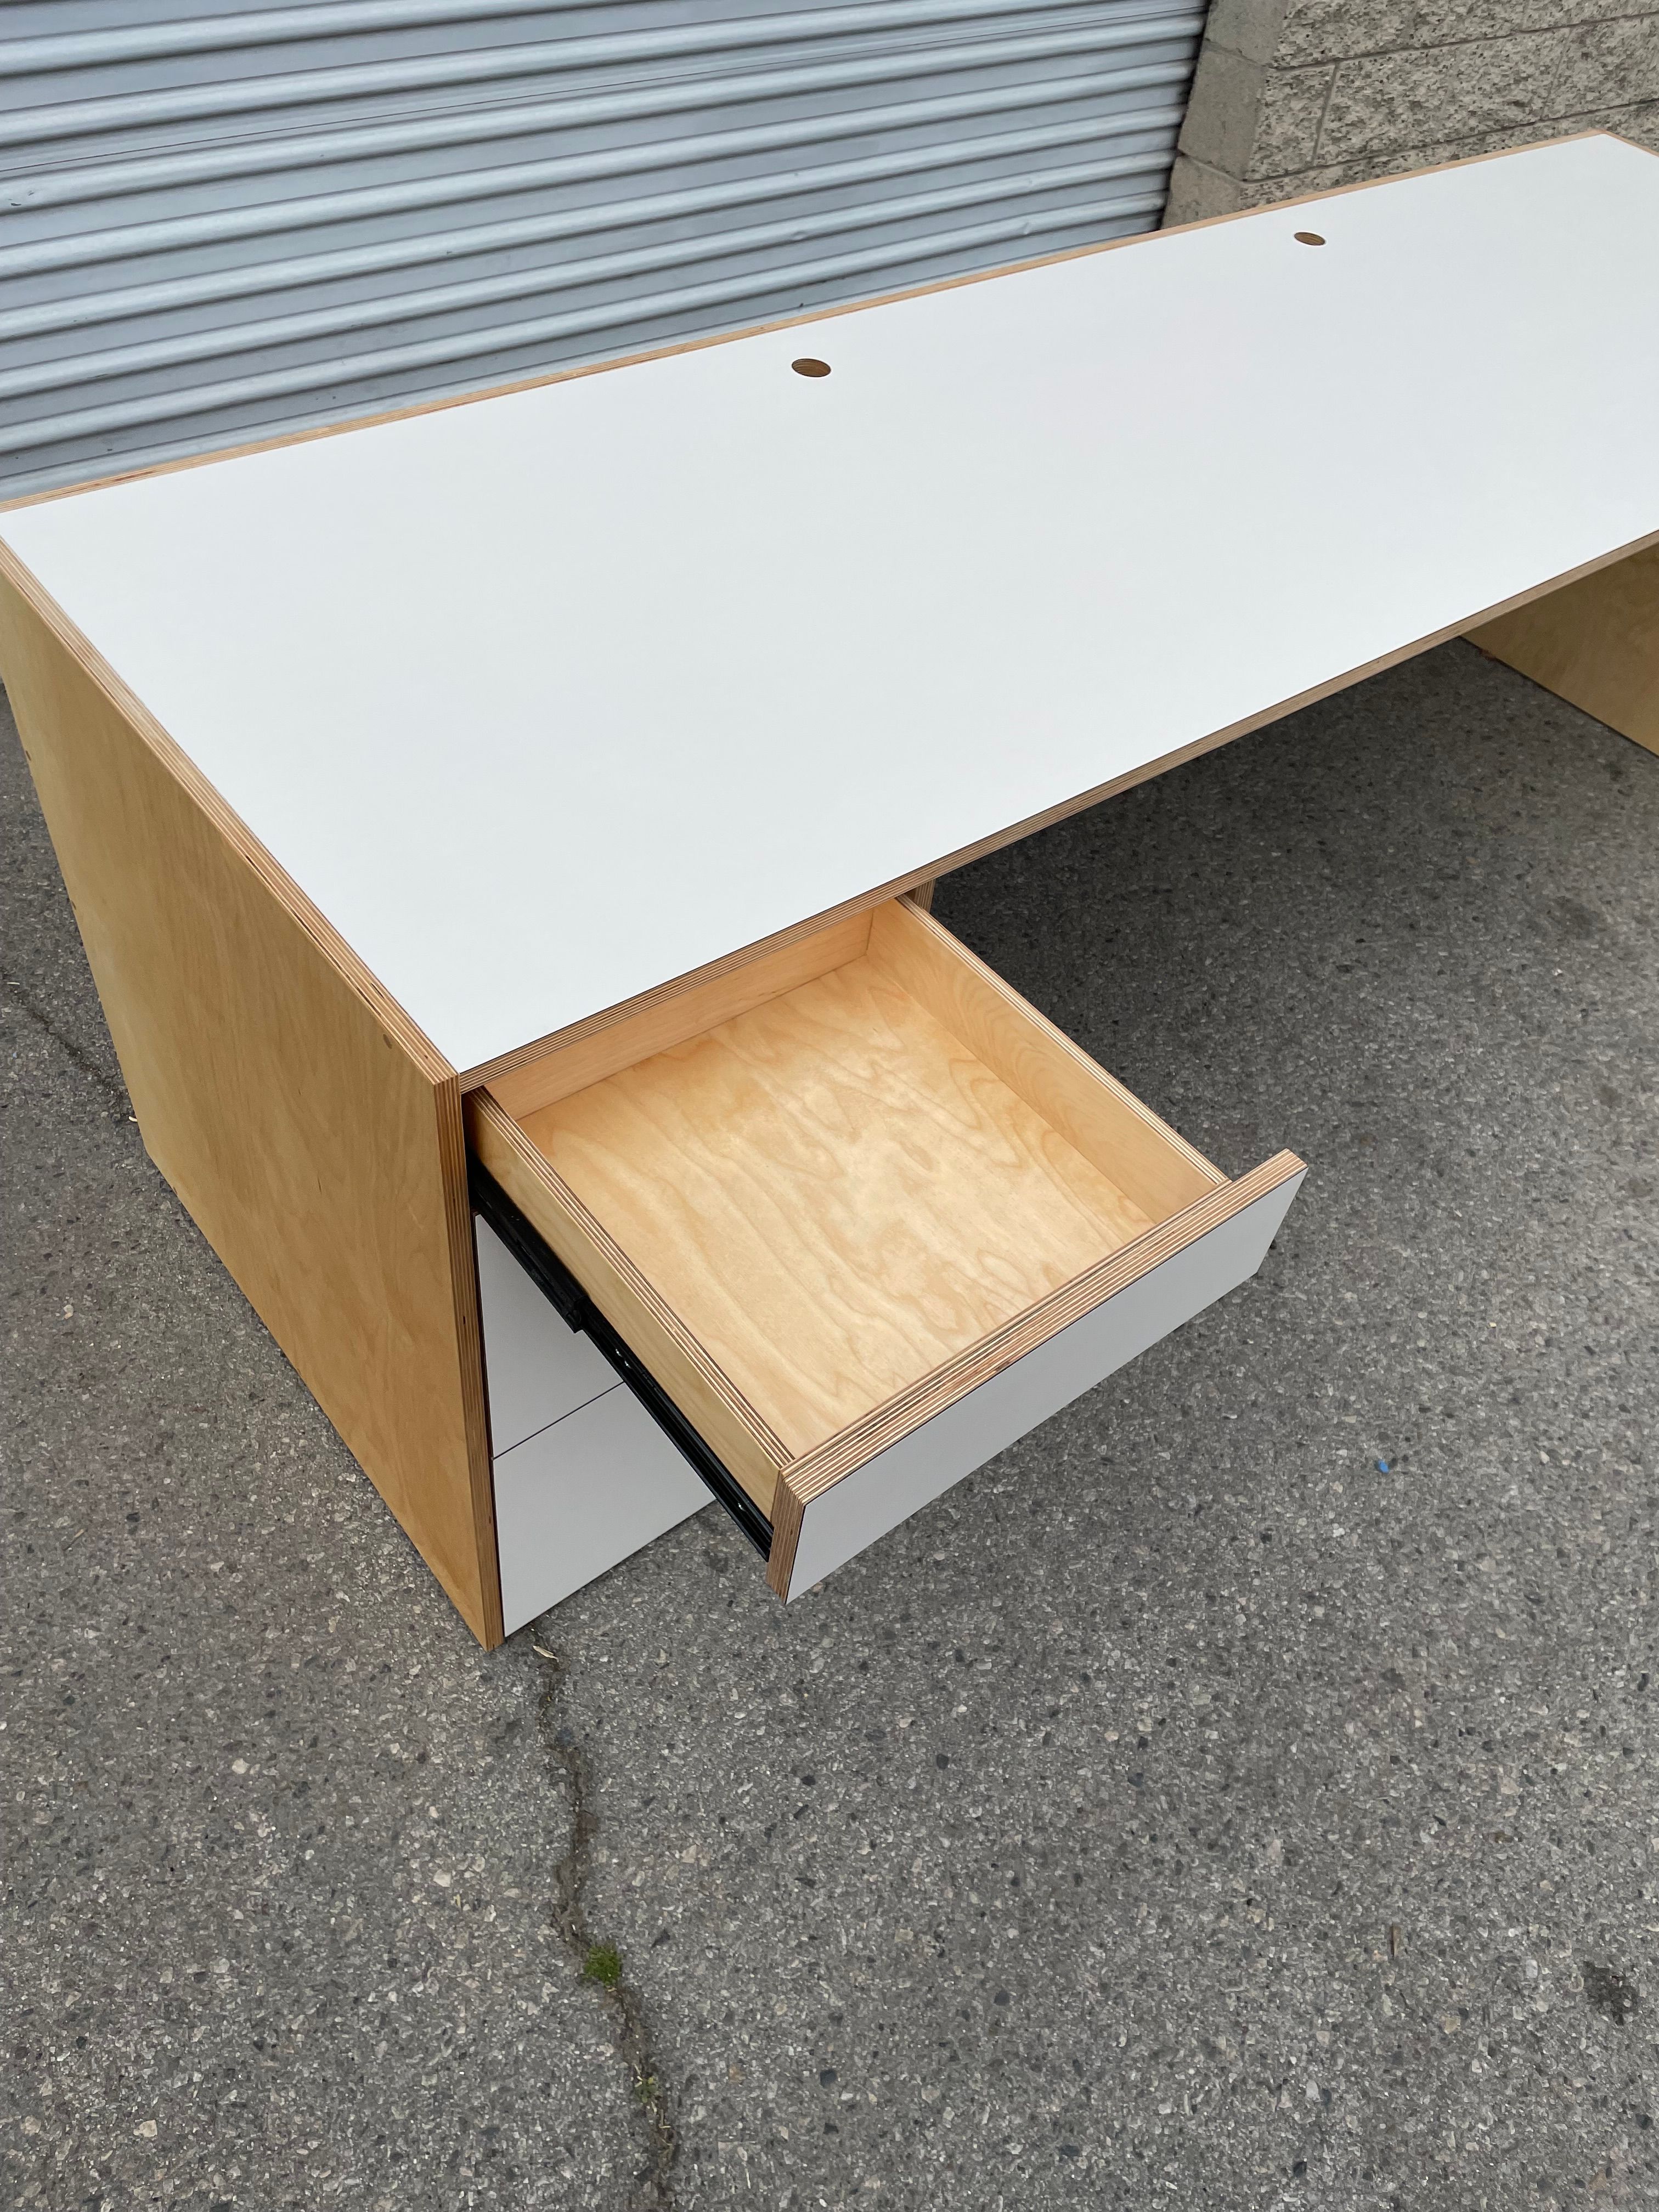  Boss Desk w/ Drawers - Department of Sales product image 3